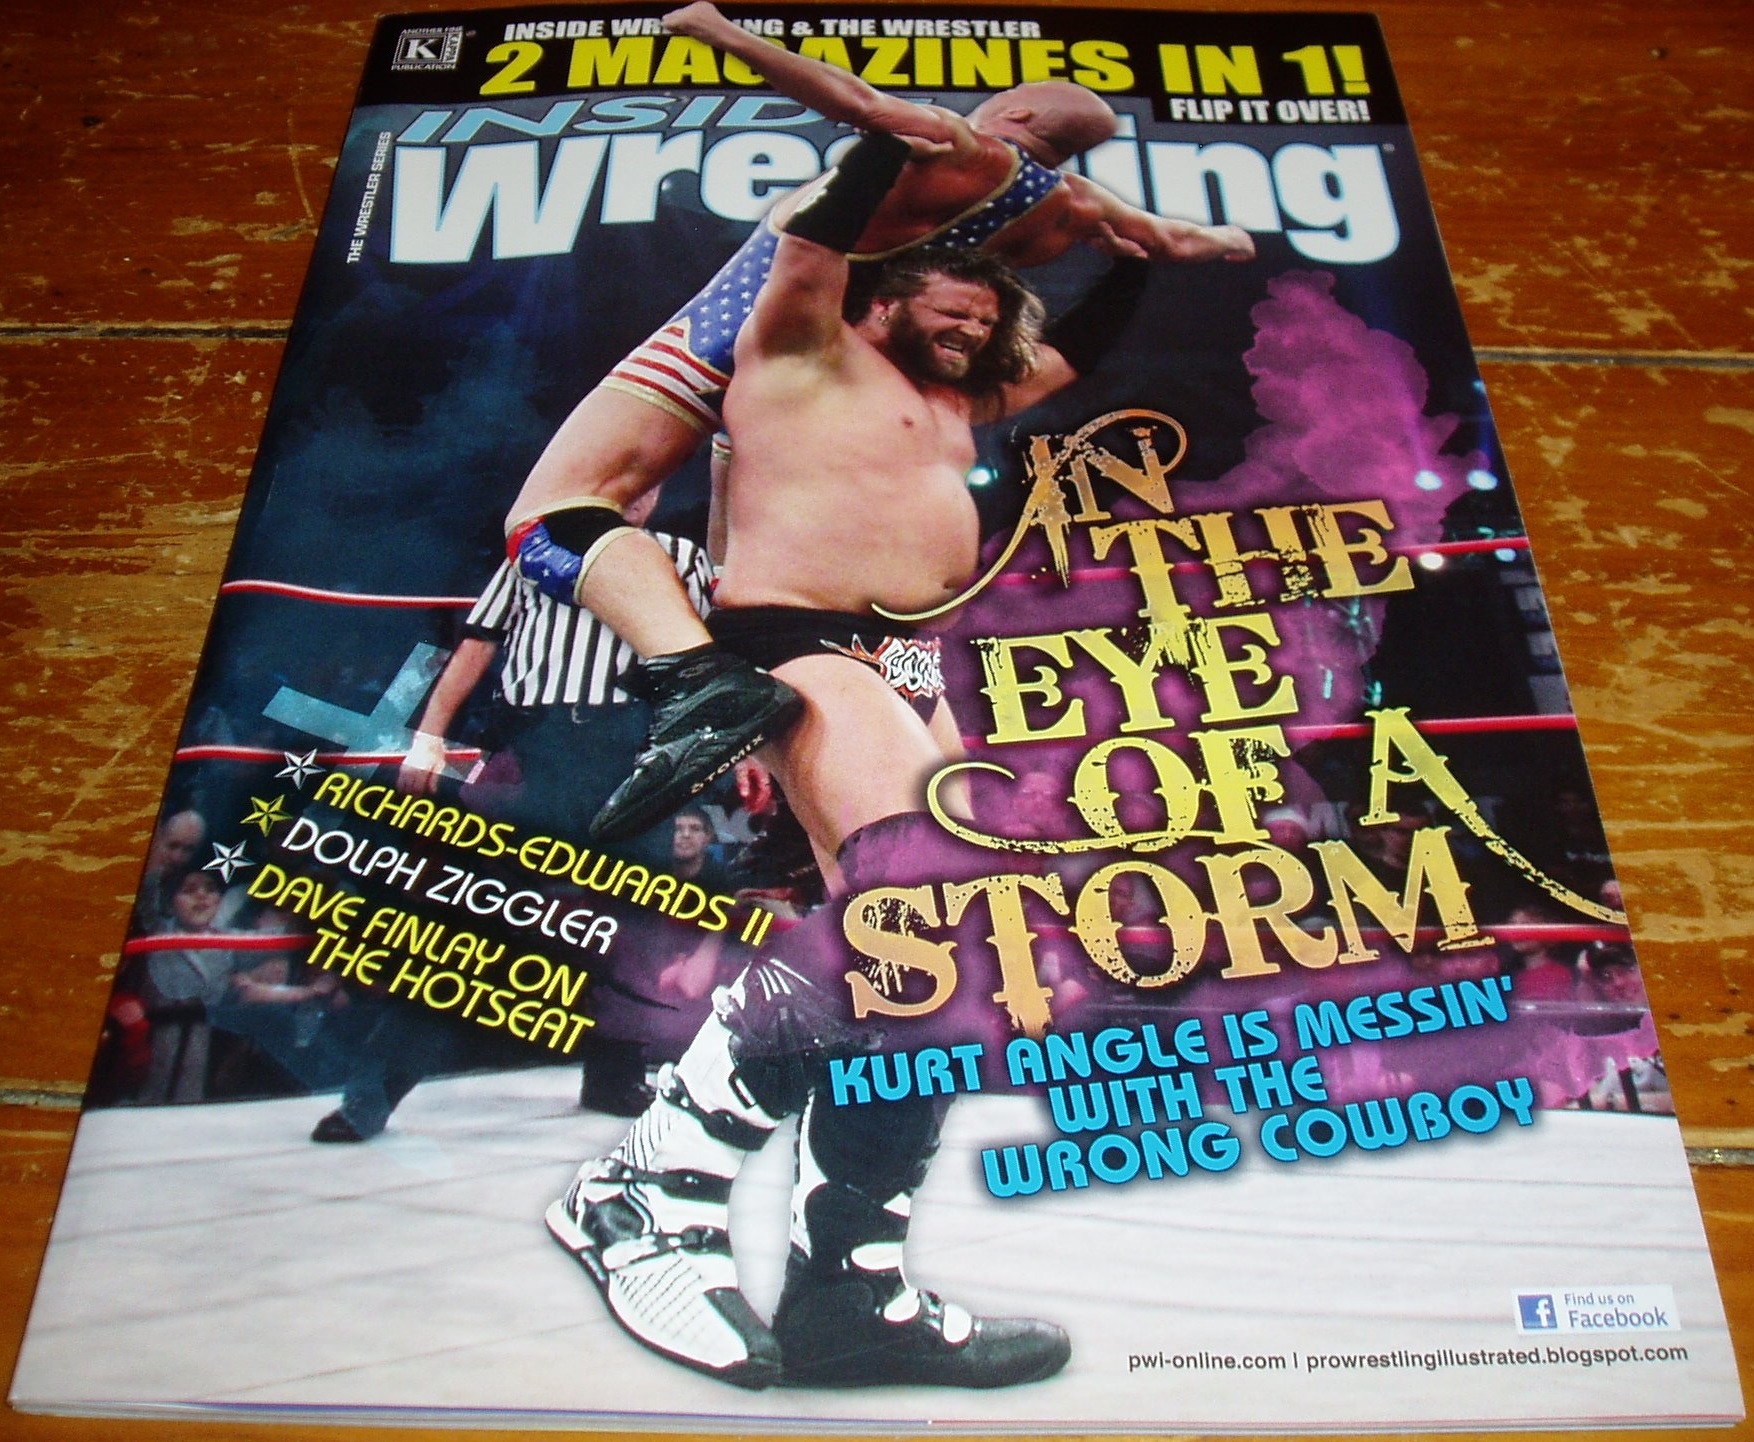 Inside Wrestling March 2012 magazine back issue Inside Wrestling magizine back copy Inside Wrestling March 2012 Magazine Back Issue Published by The Wrestling Federation, WWE & WWF. In the eye of the storm .